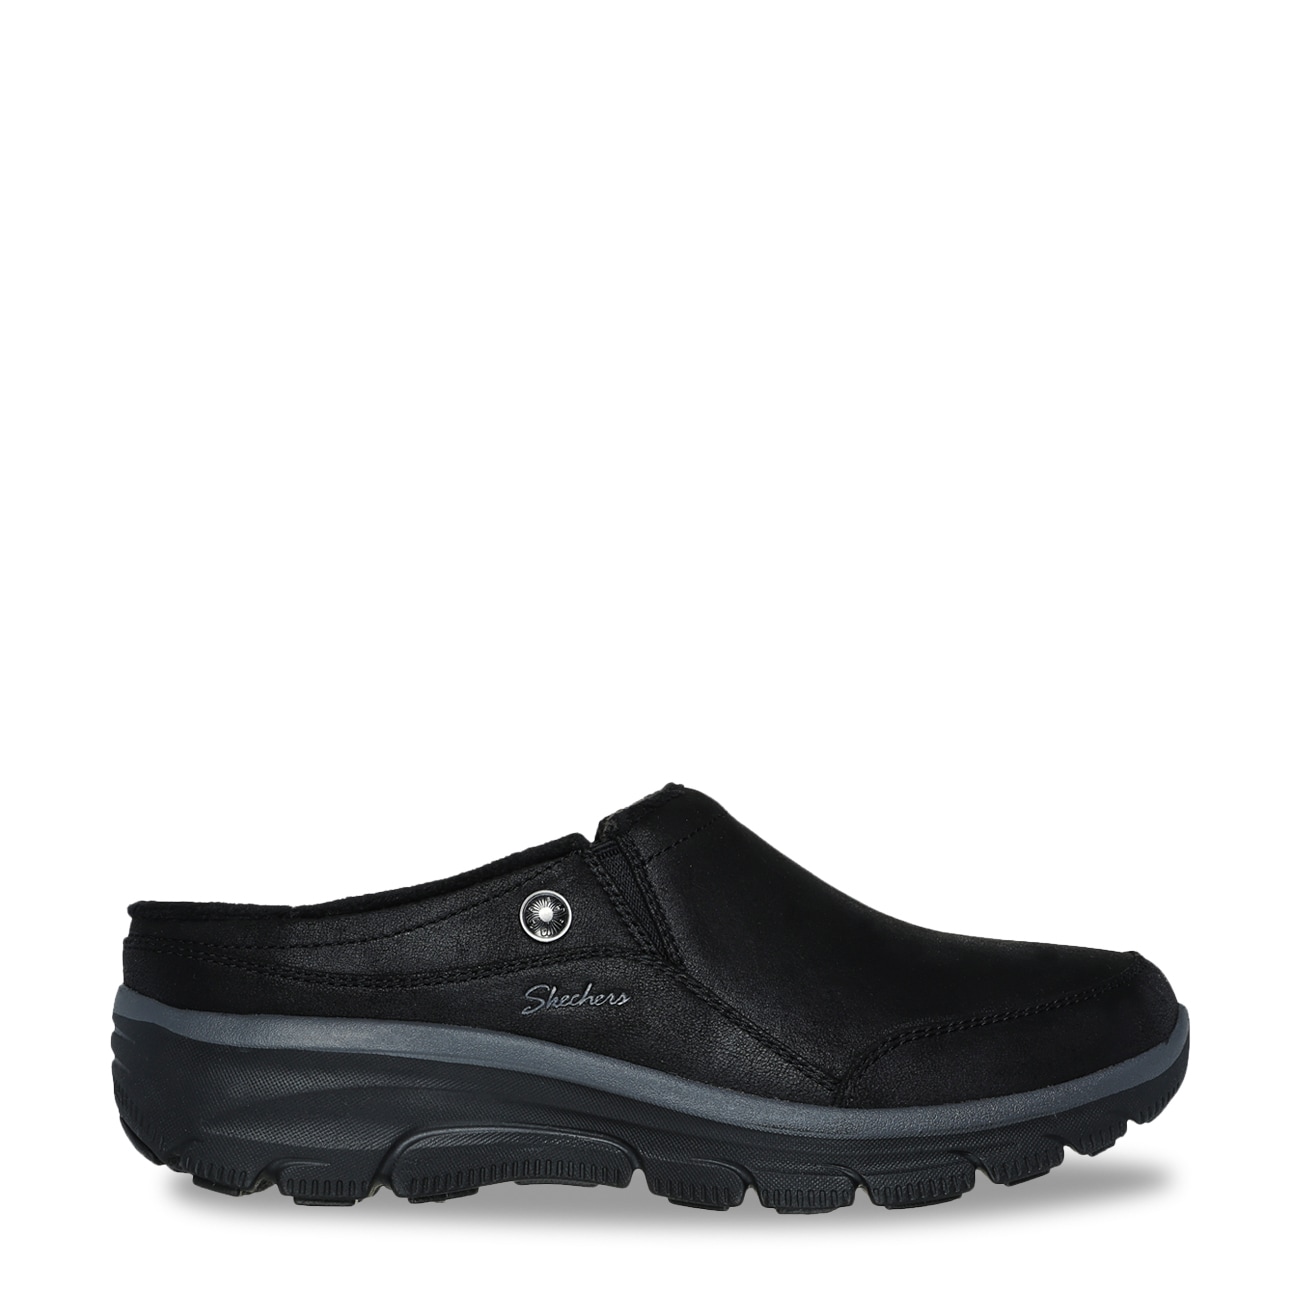 Skechers Relaxed Fit Easy Going Latte 2 Mule